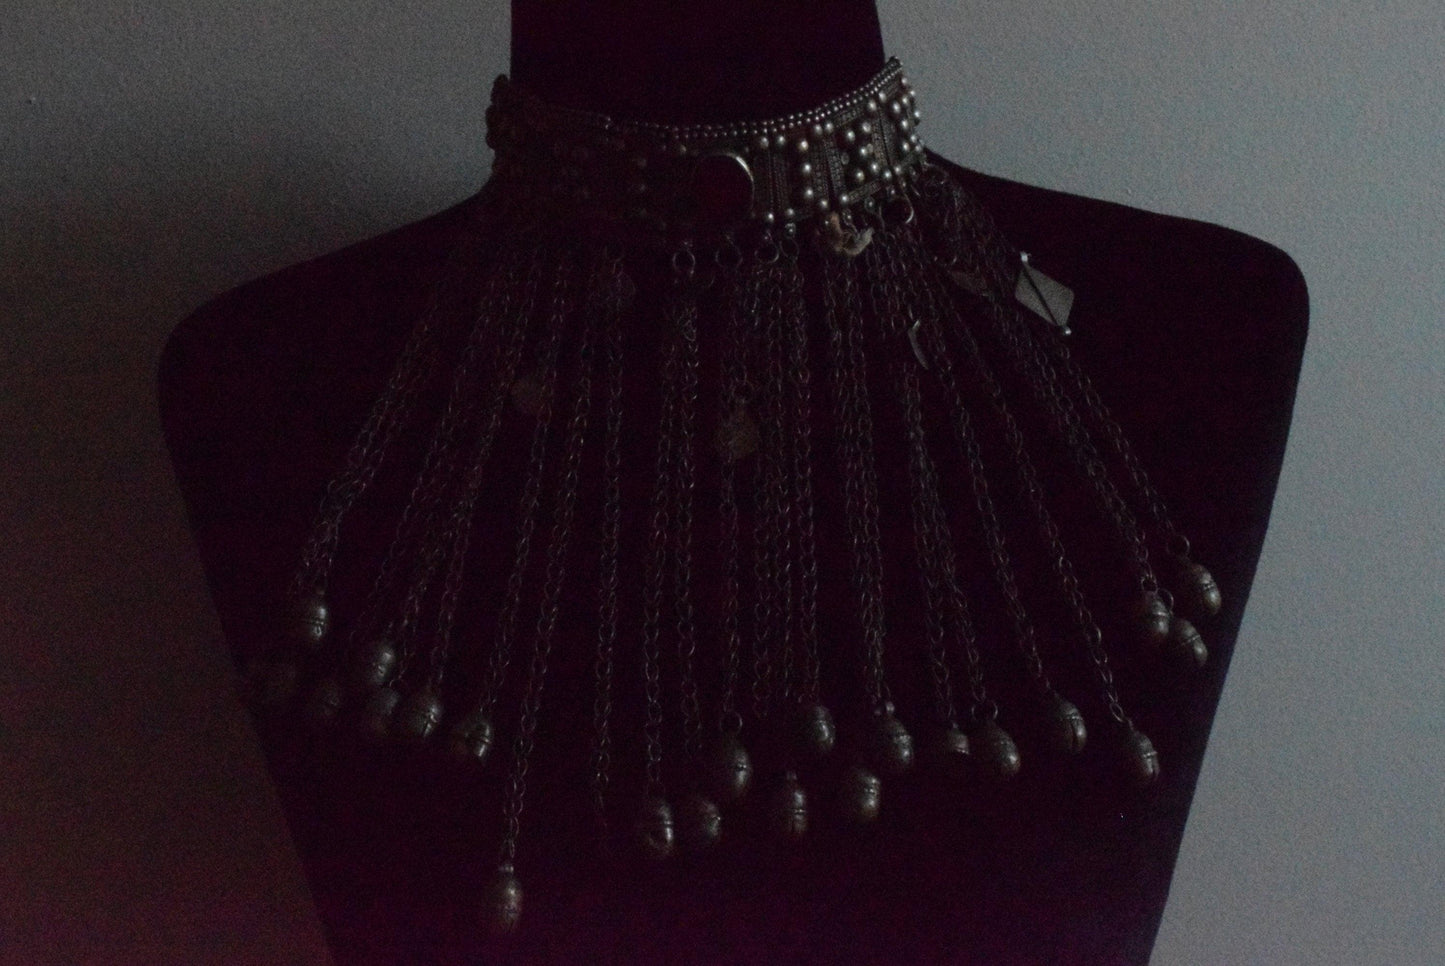 Vintage Silver Bedouin Choker Necklace with Long Chains - Anteeka